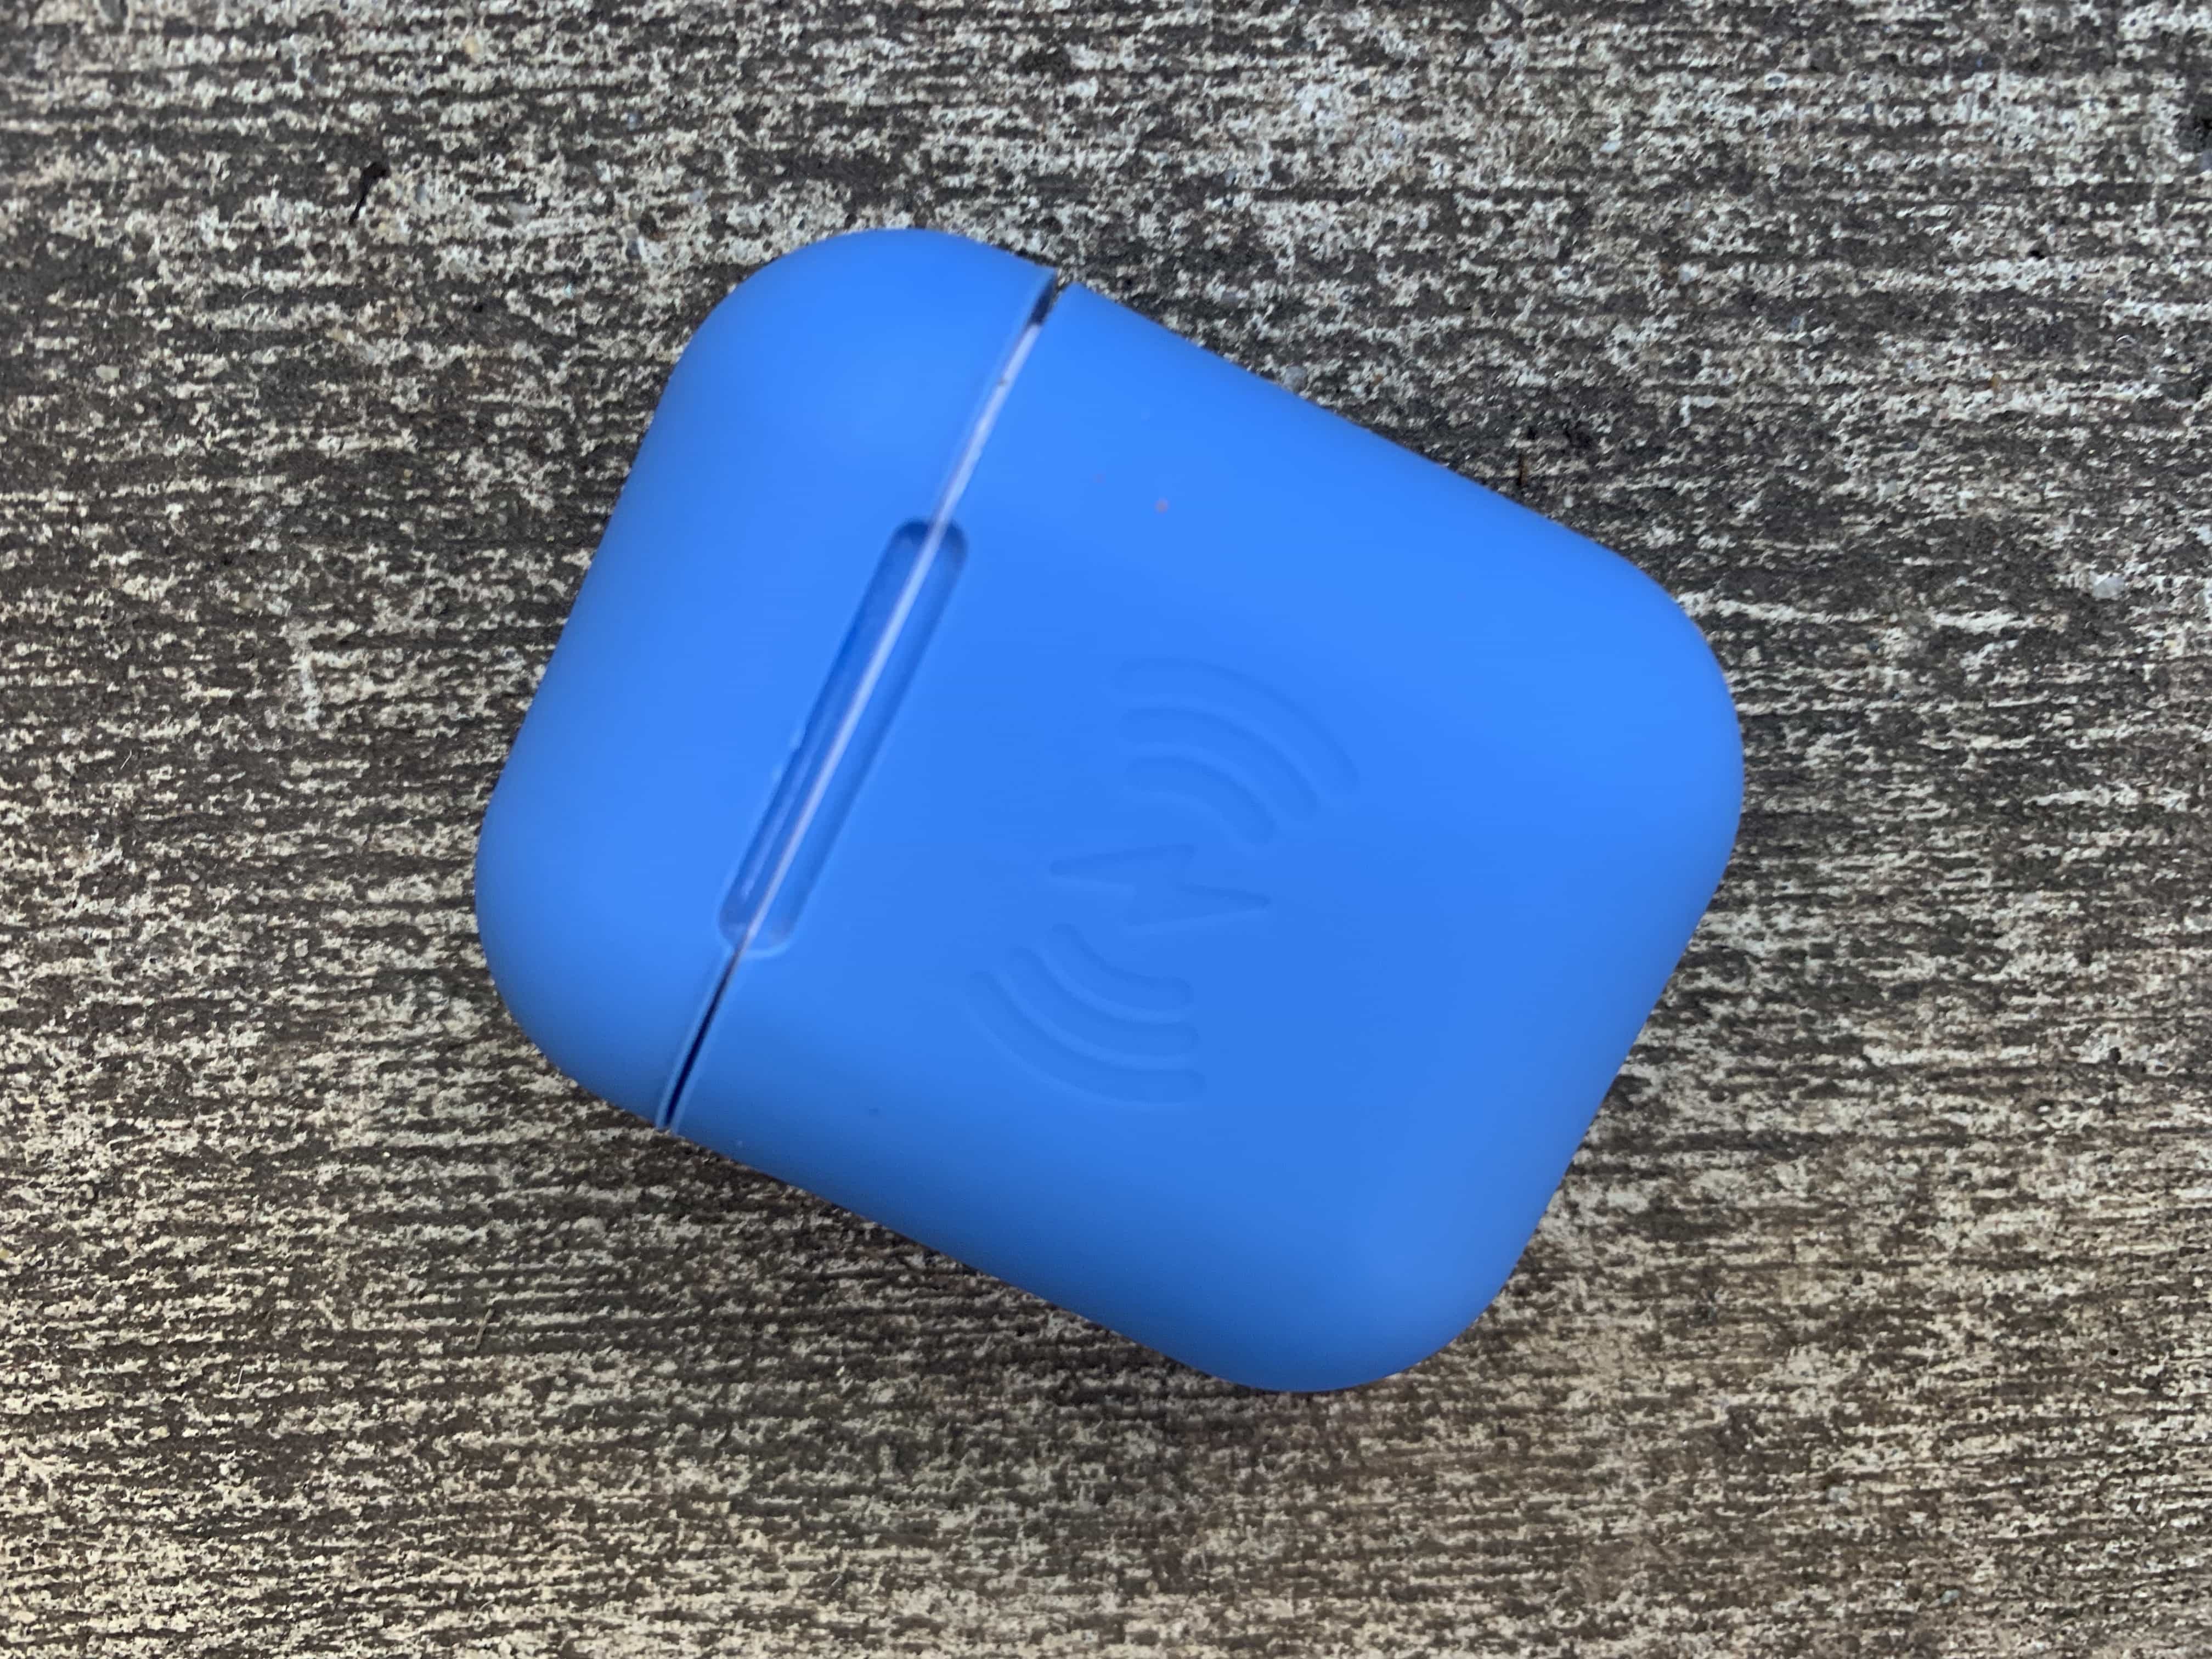 You can have wireless AirPods charging right now, if you must, with SliQ silicone AirPods case.